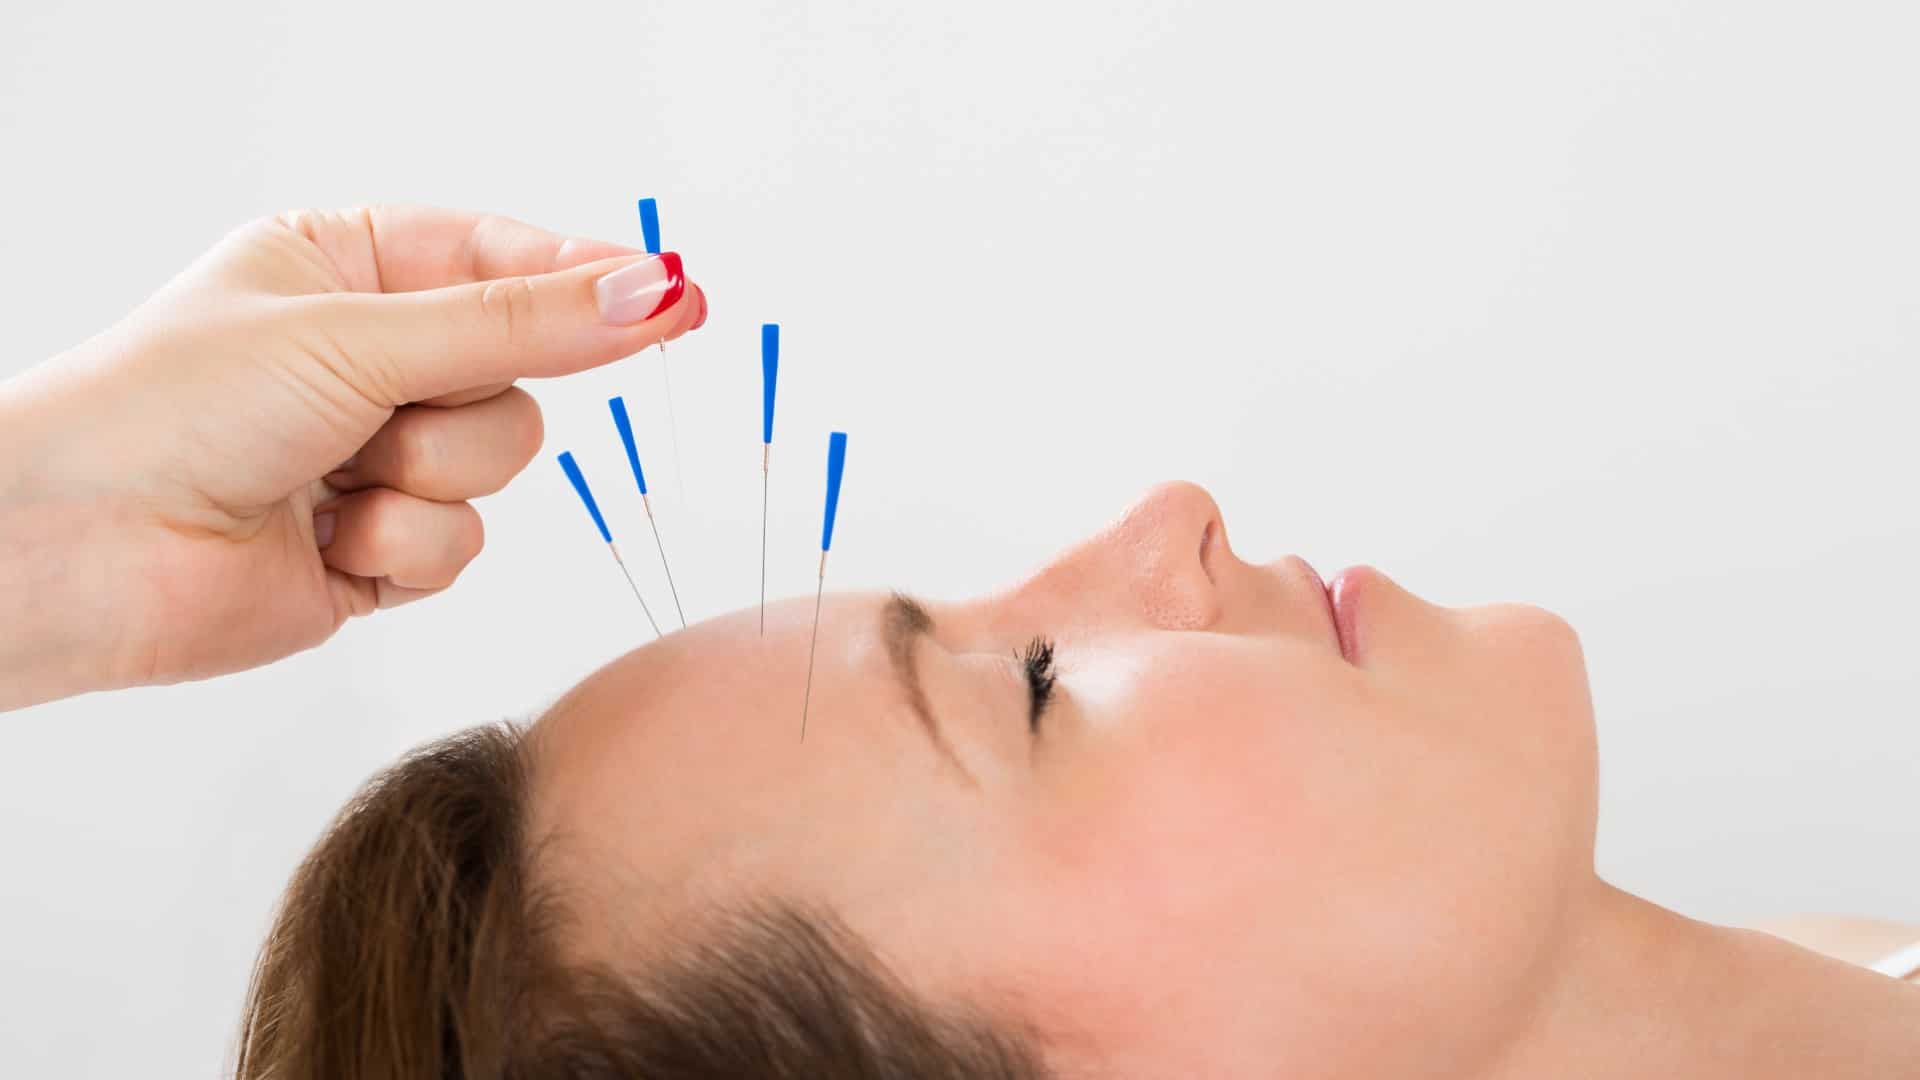 Patient gets acupuncture to treat their migraine | Acupuncture for Headaches and Migraines | NorthEast Spine and Sports Medicine